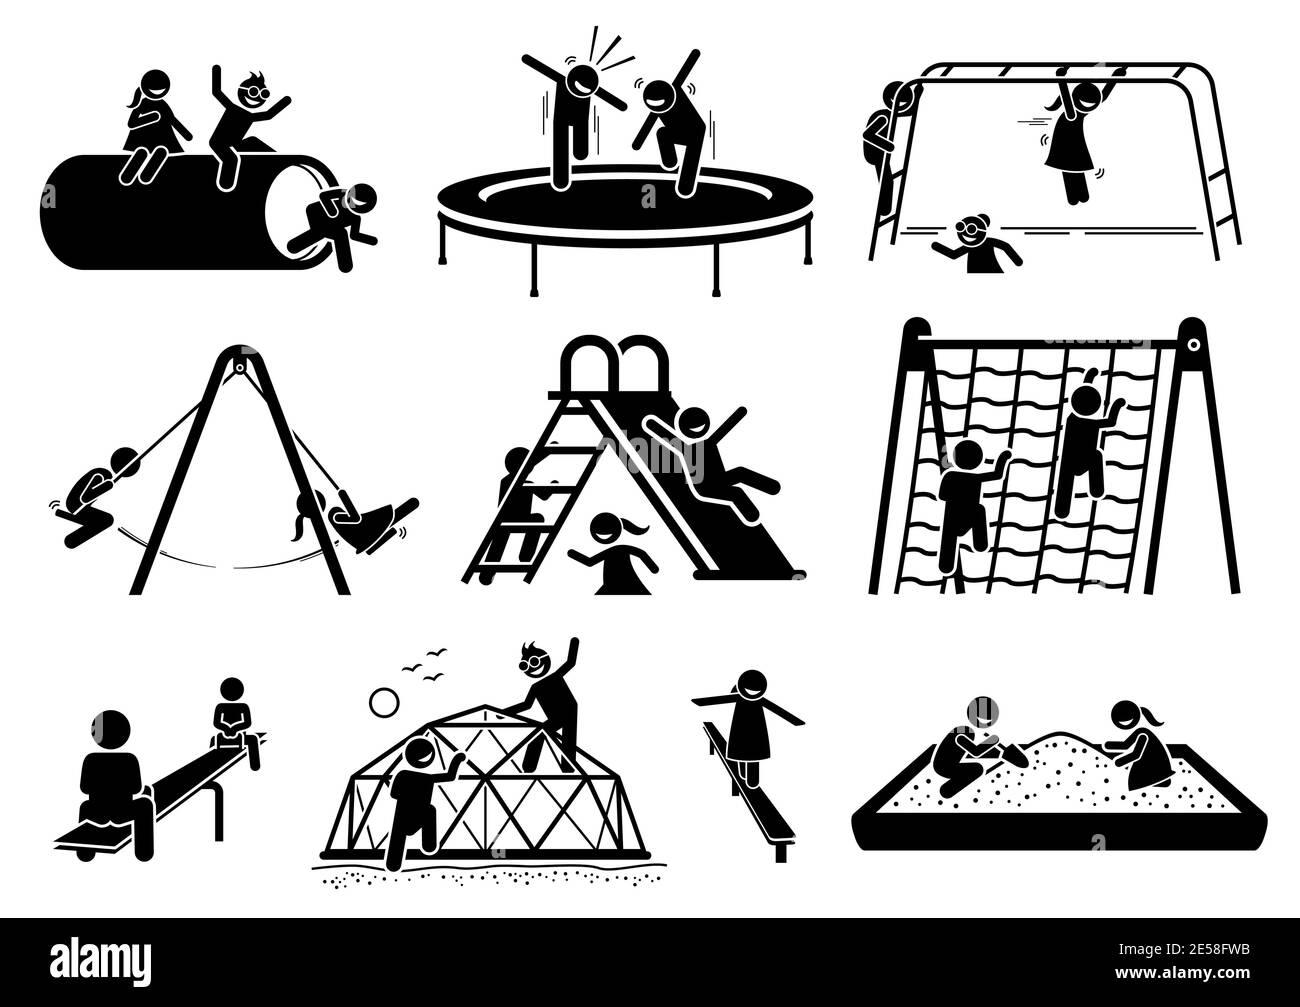 Kids net Cut Out Stock Images & Pictures - Alamy